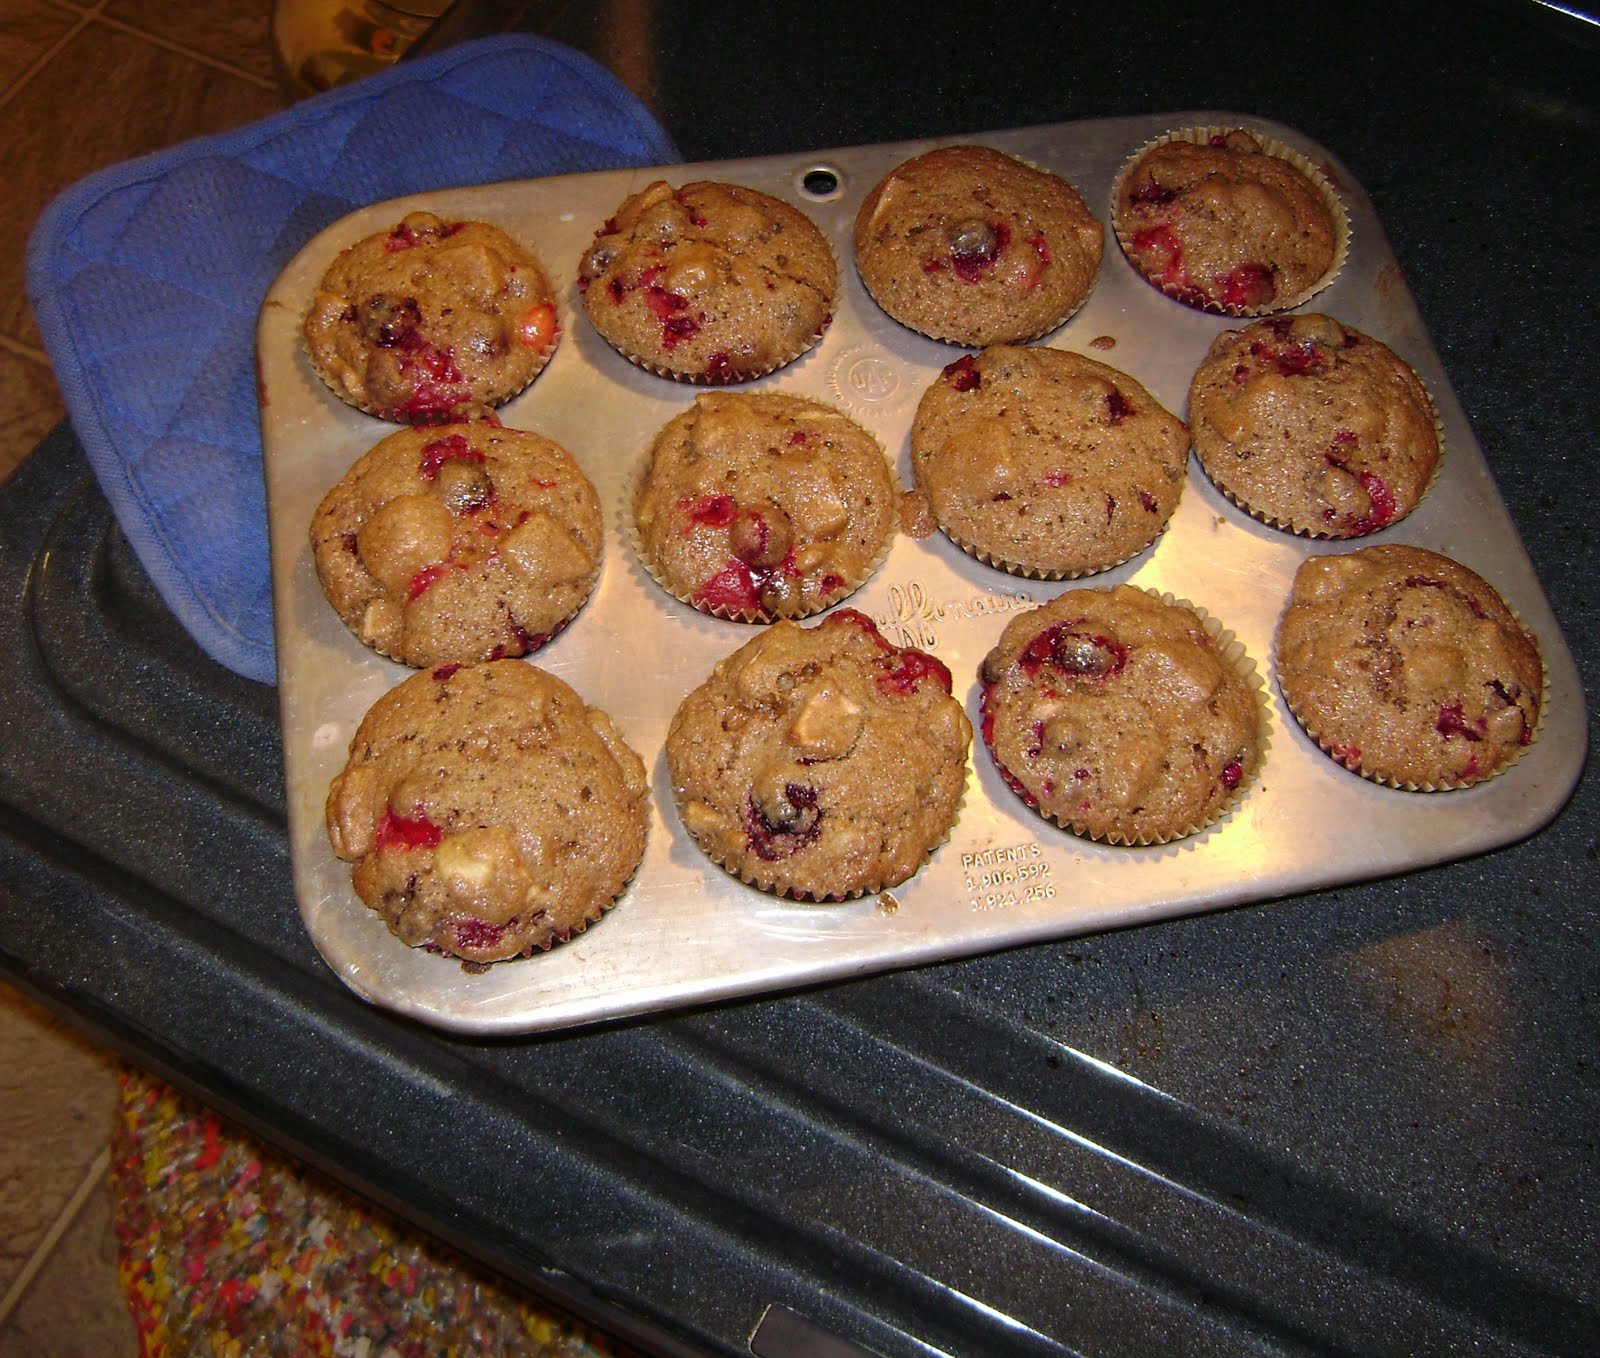 Potlicker: Cranberry Apple Muffins (vegan with simple substitutions)